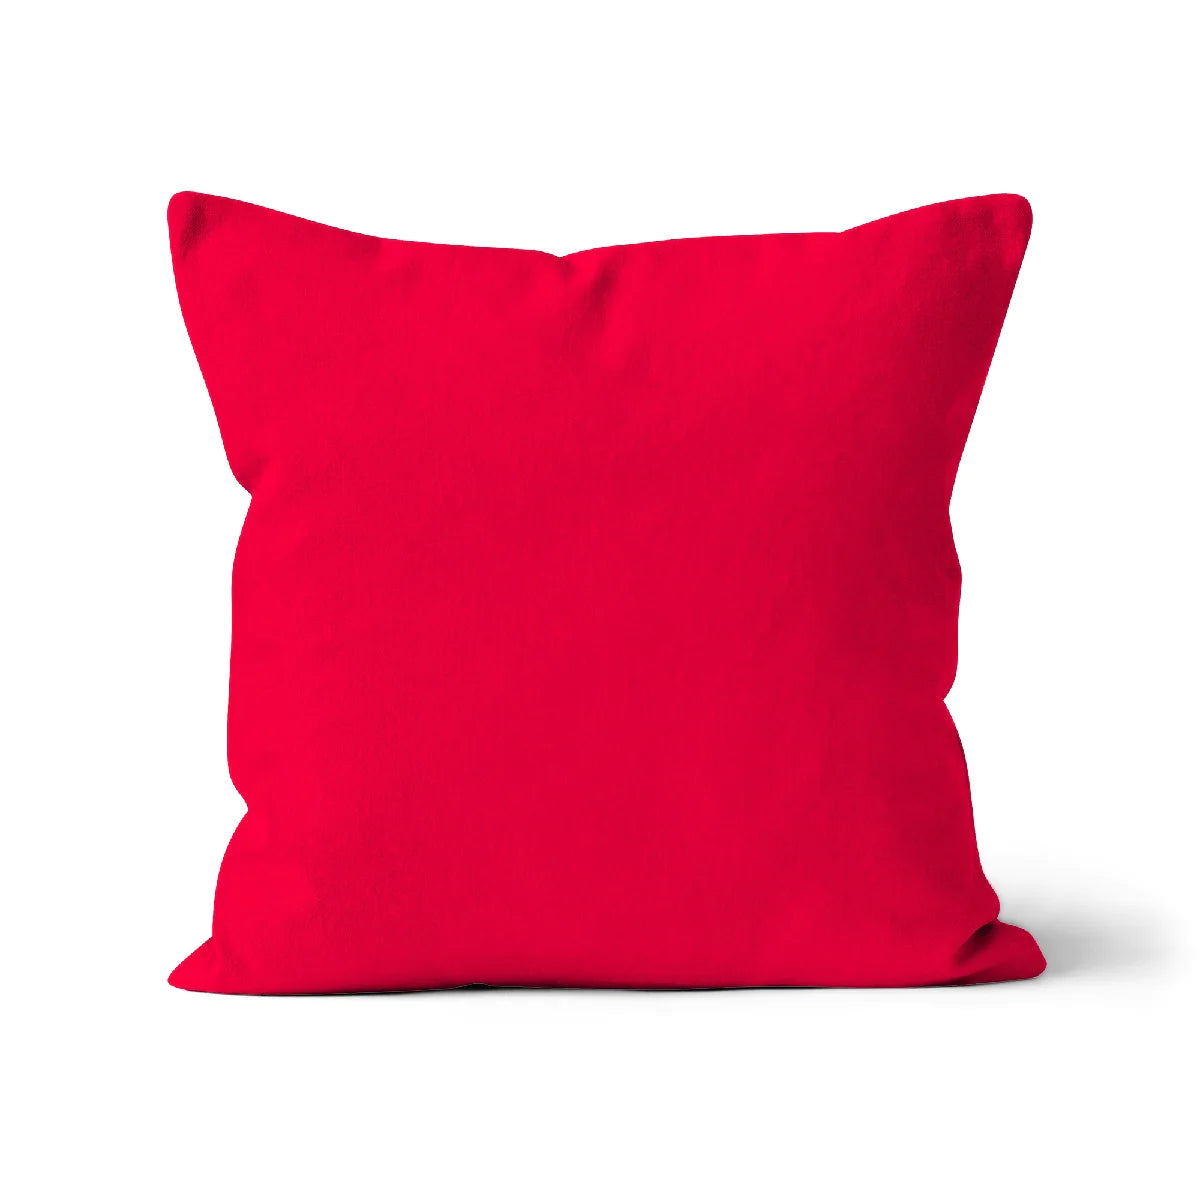 bright red cushion cover, organic cotton cushion cover, bright red cushion cover in cotton,  hot pink cushion cover, pink cushion cover, hot pink cushion cover in organic cotton.